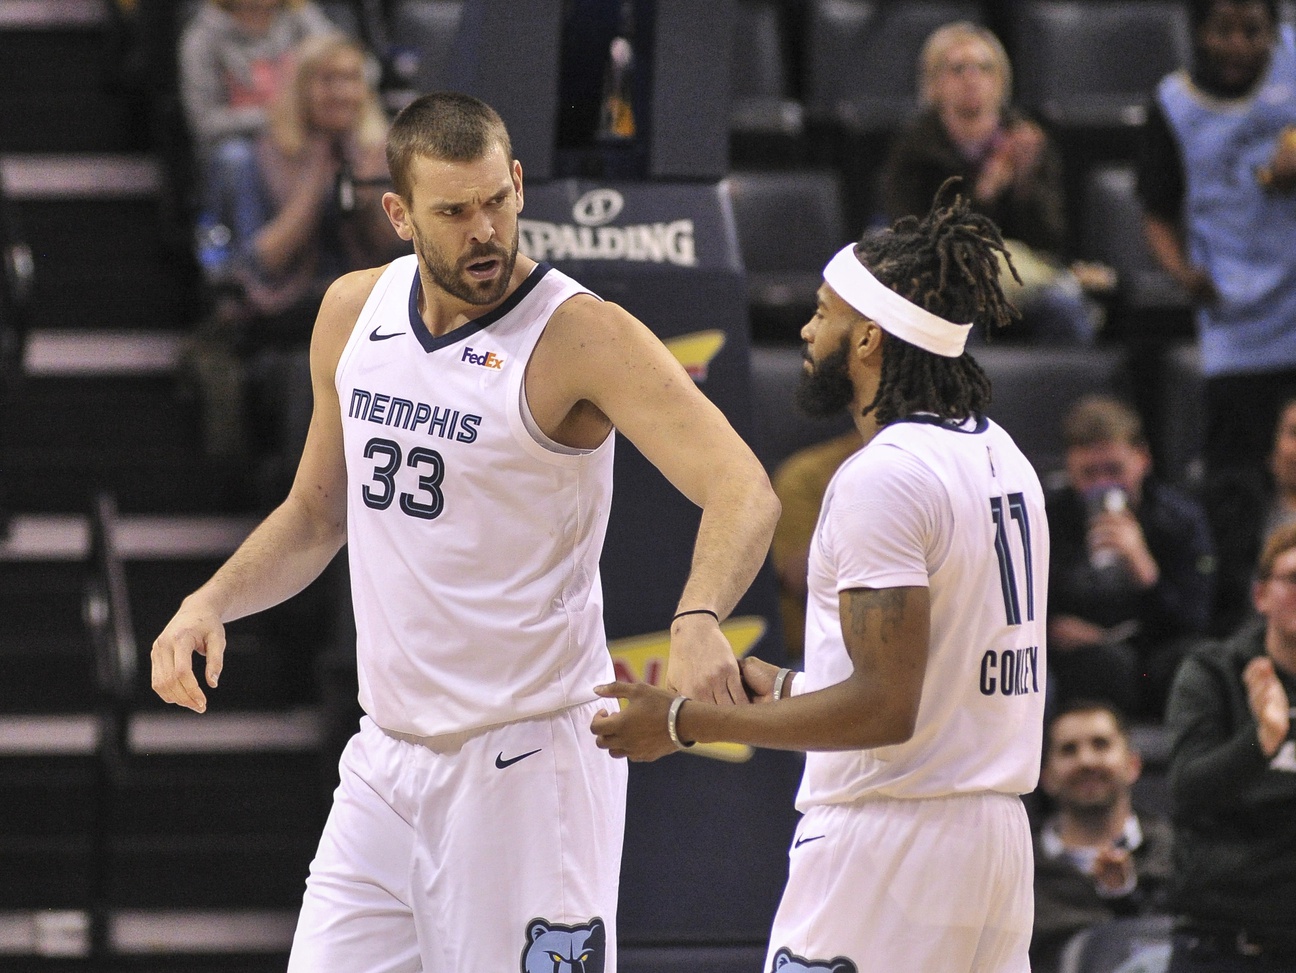 Jan 25, 2019; Memphis, TN, USA; Memphis Grizzlies center Marc Gasol (33) and guard Mike Conley (11) talk during the second half against the Sacramento Kings at FedExForum. Sacramento Kings defeated the Memphis Grizzlies 99-96.Mandatory Credit: Justin Ford-USA TODAY Sports